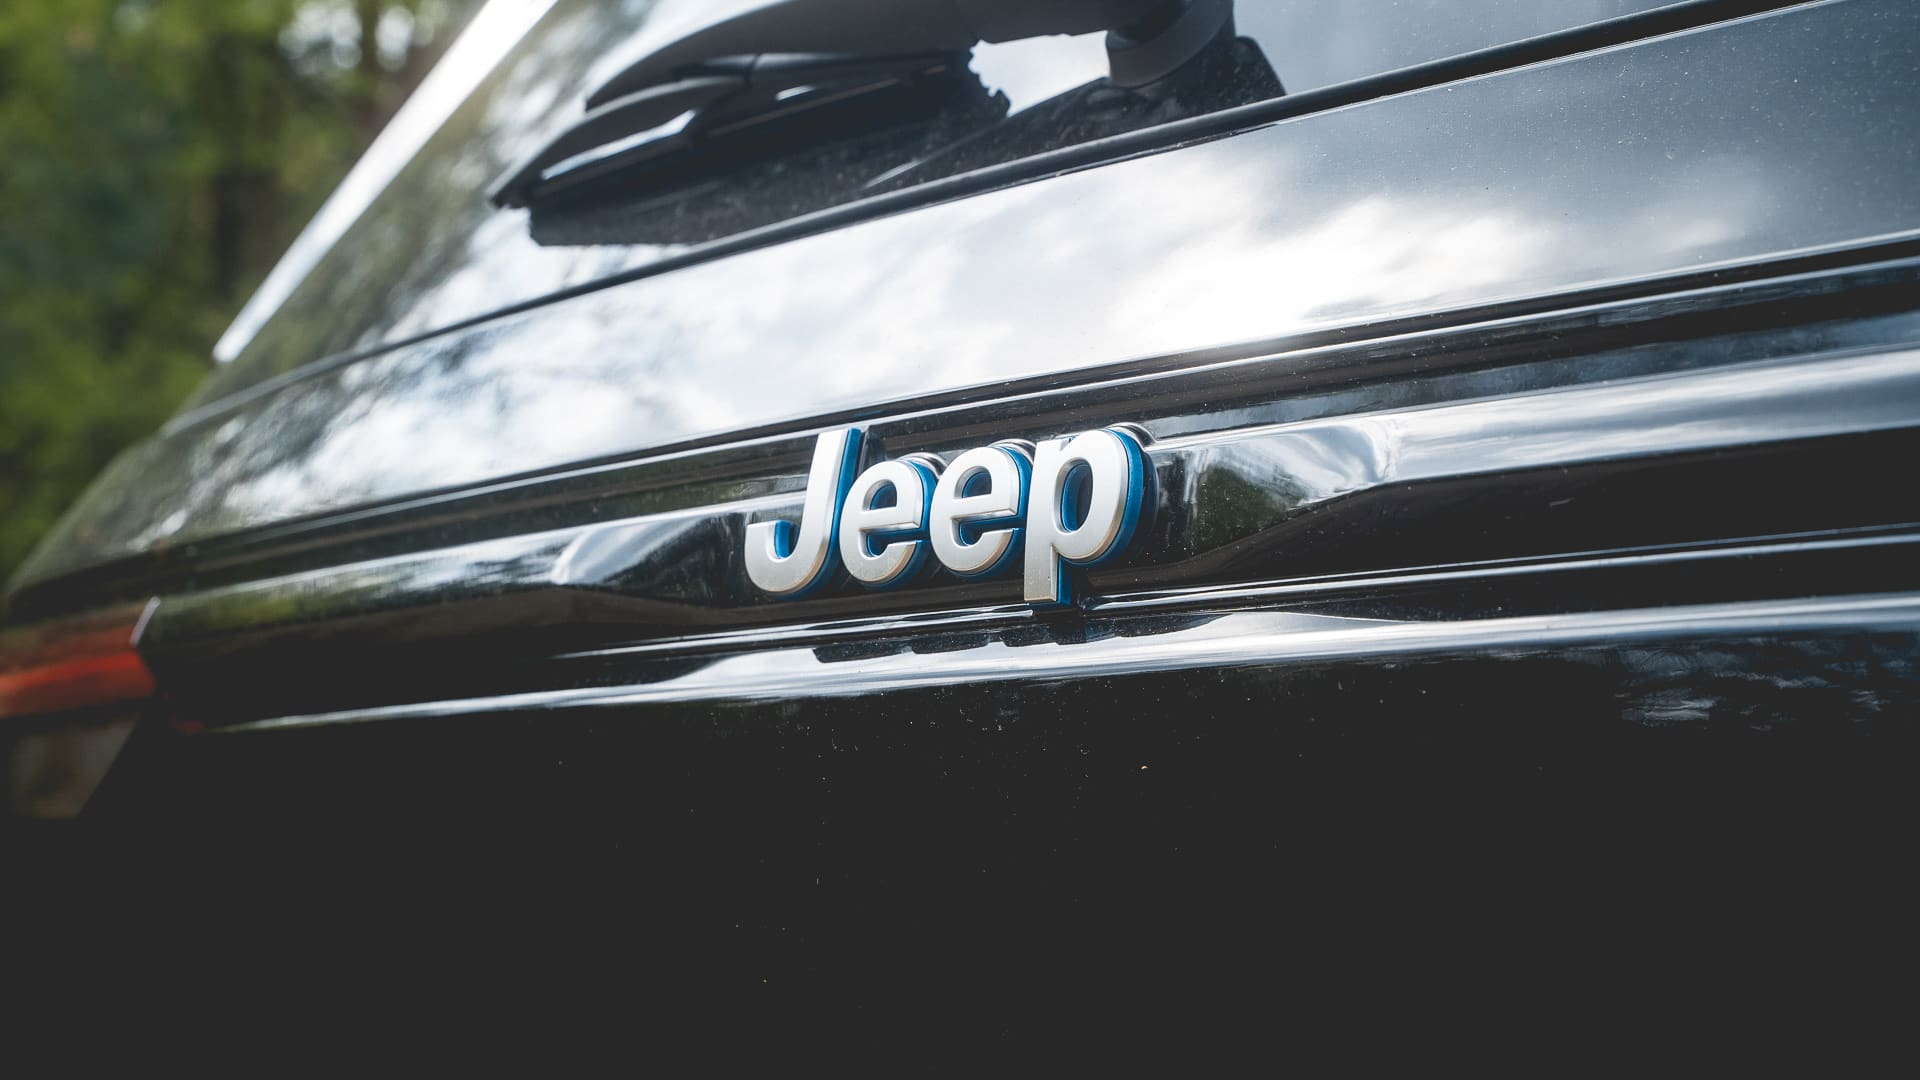 Jeep Grand Cherokee, <strong>Meet The Grand:</strong> Jeeps klassementsrijder